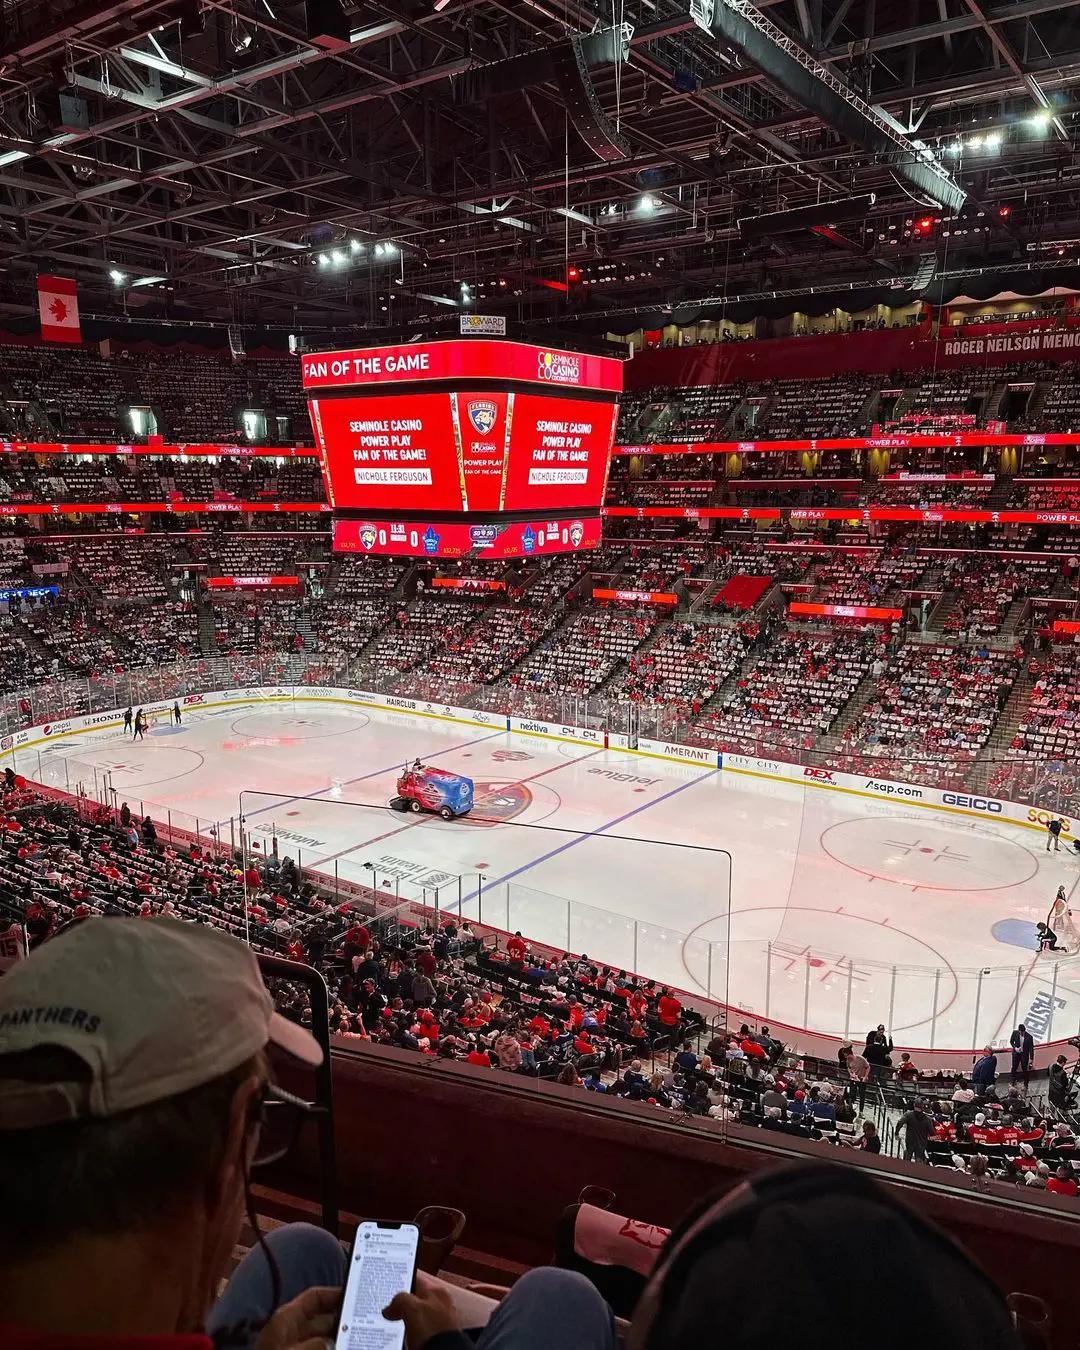 The NHL Franchise Is Based In Sunrise, Florida Since 1993